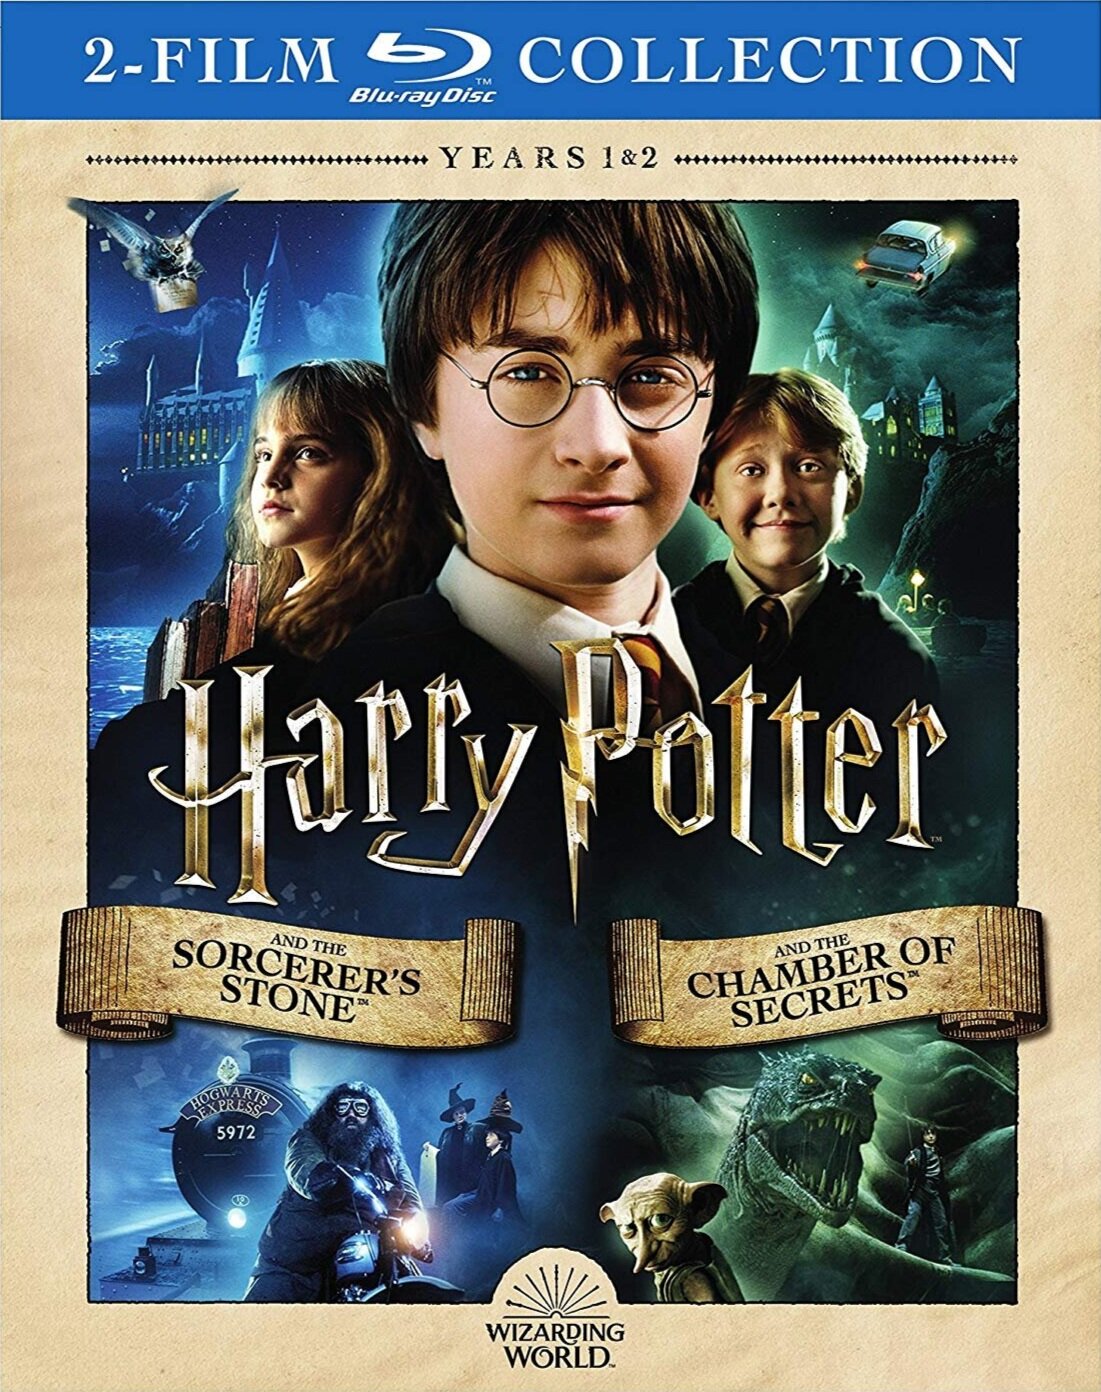 HARRY POTTER COMPLETE MOVIES 1 2 3 4 5 6 7 8 *BRAND NEW DVD BOXSET***